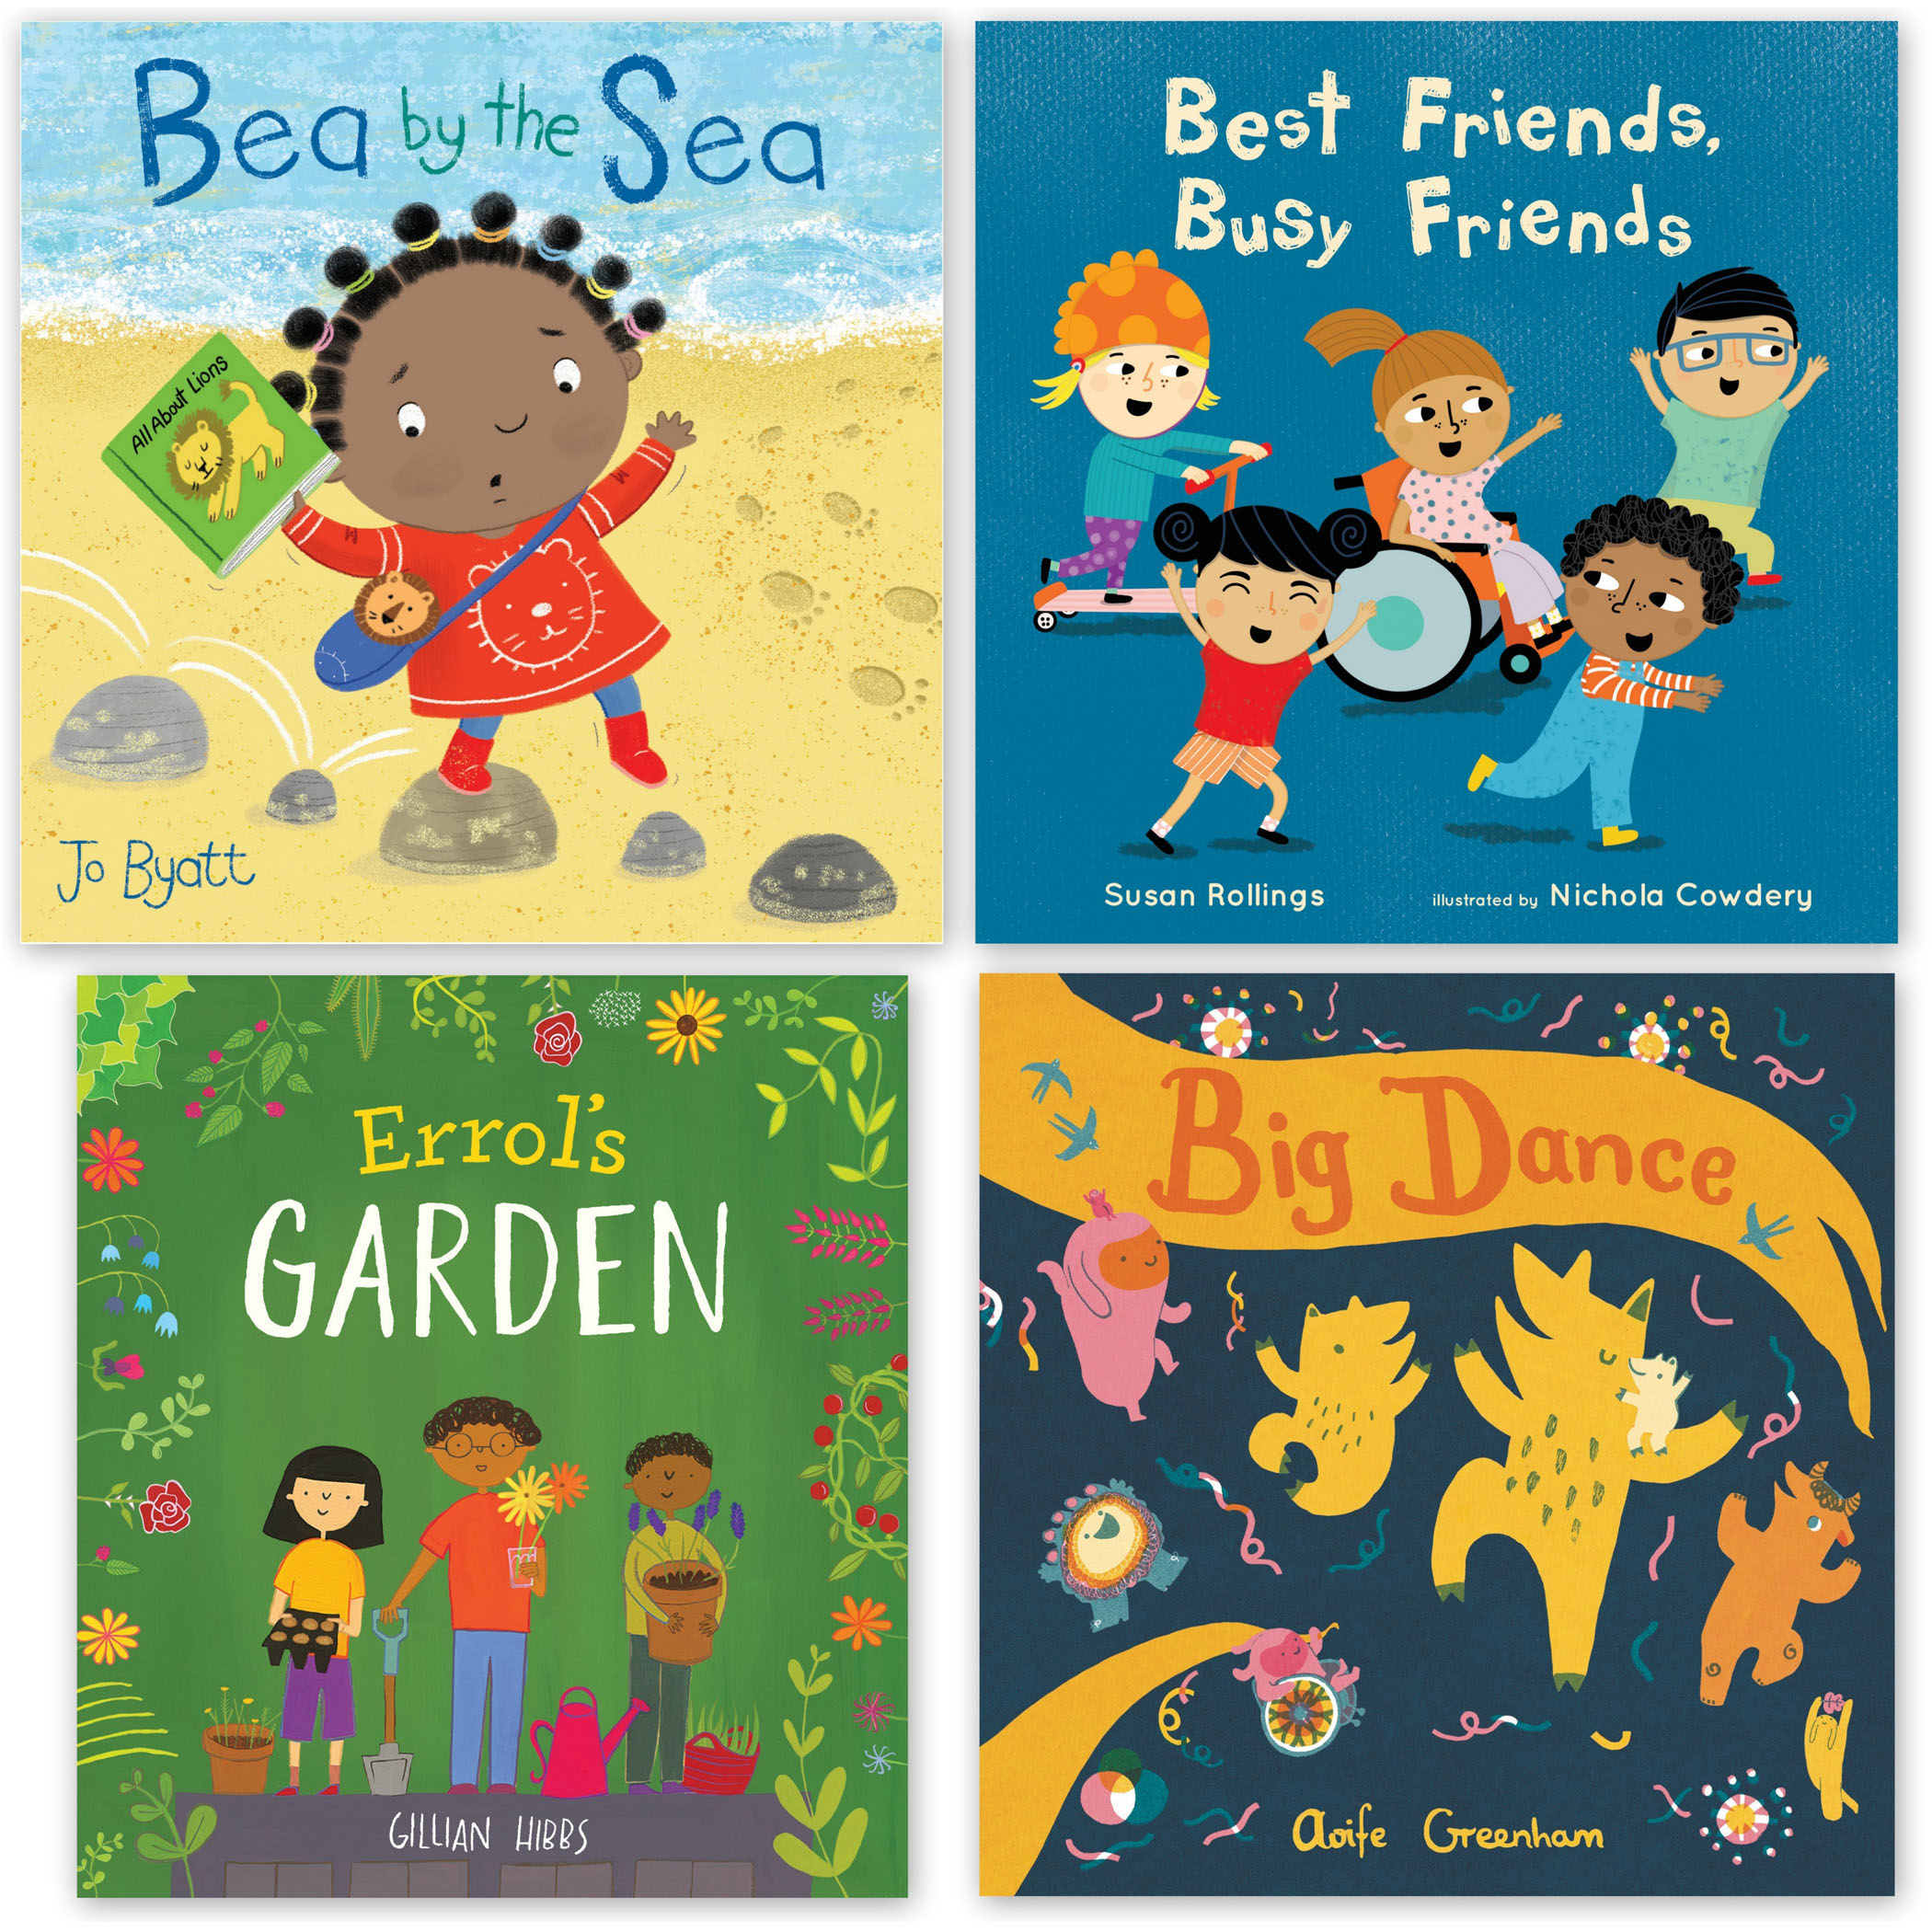 Child's Play Books Friendship and Community Books, Set of 4